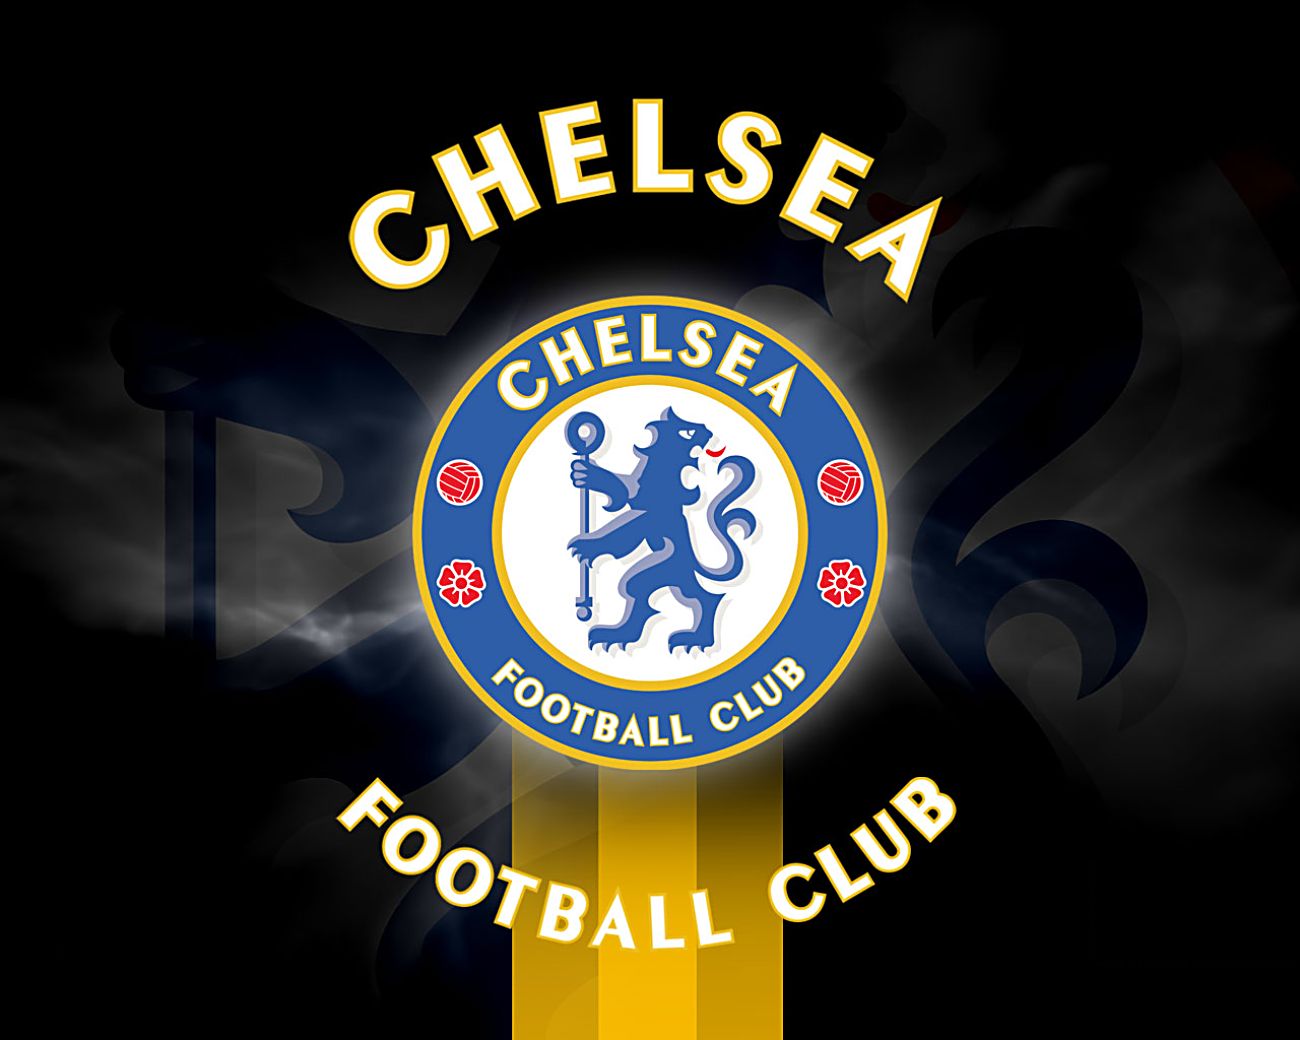 Football Game: The collection of Chelsea logo